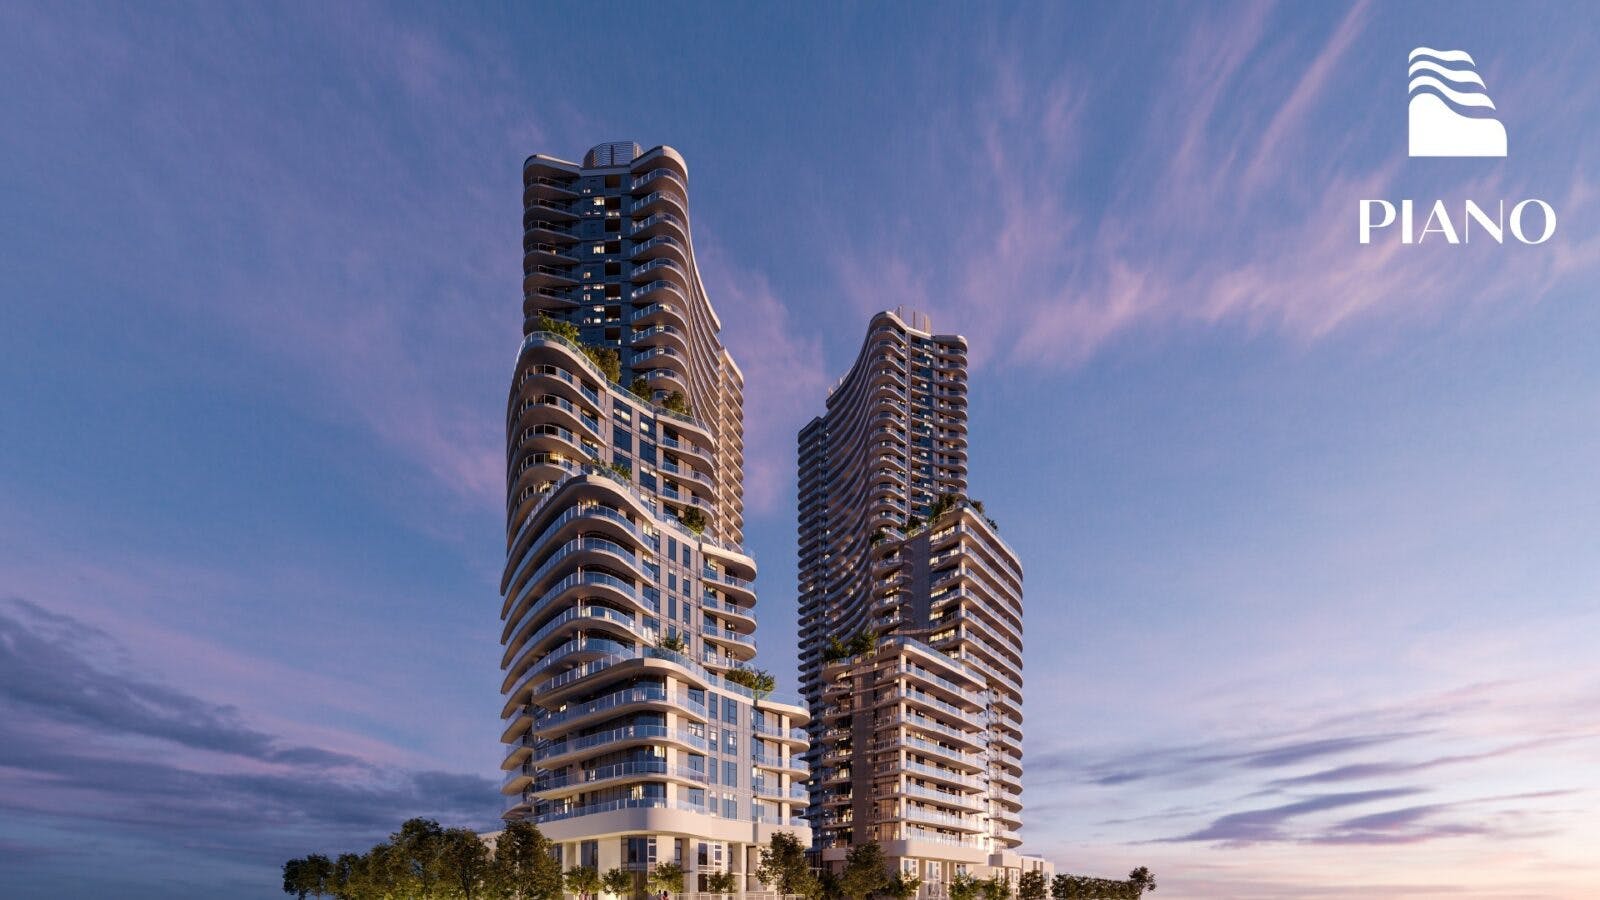 The Piano is the newest residential tower located in Surrey